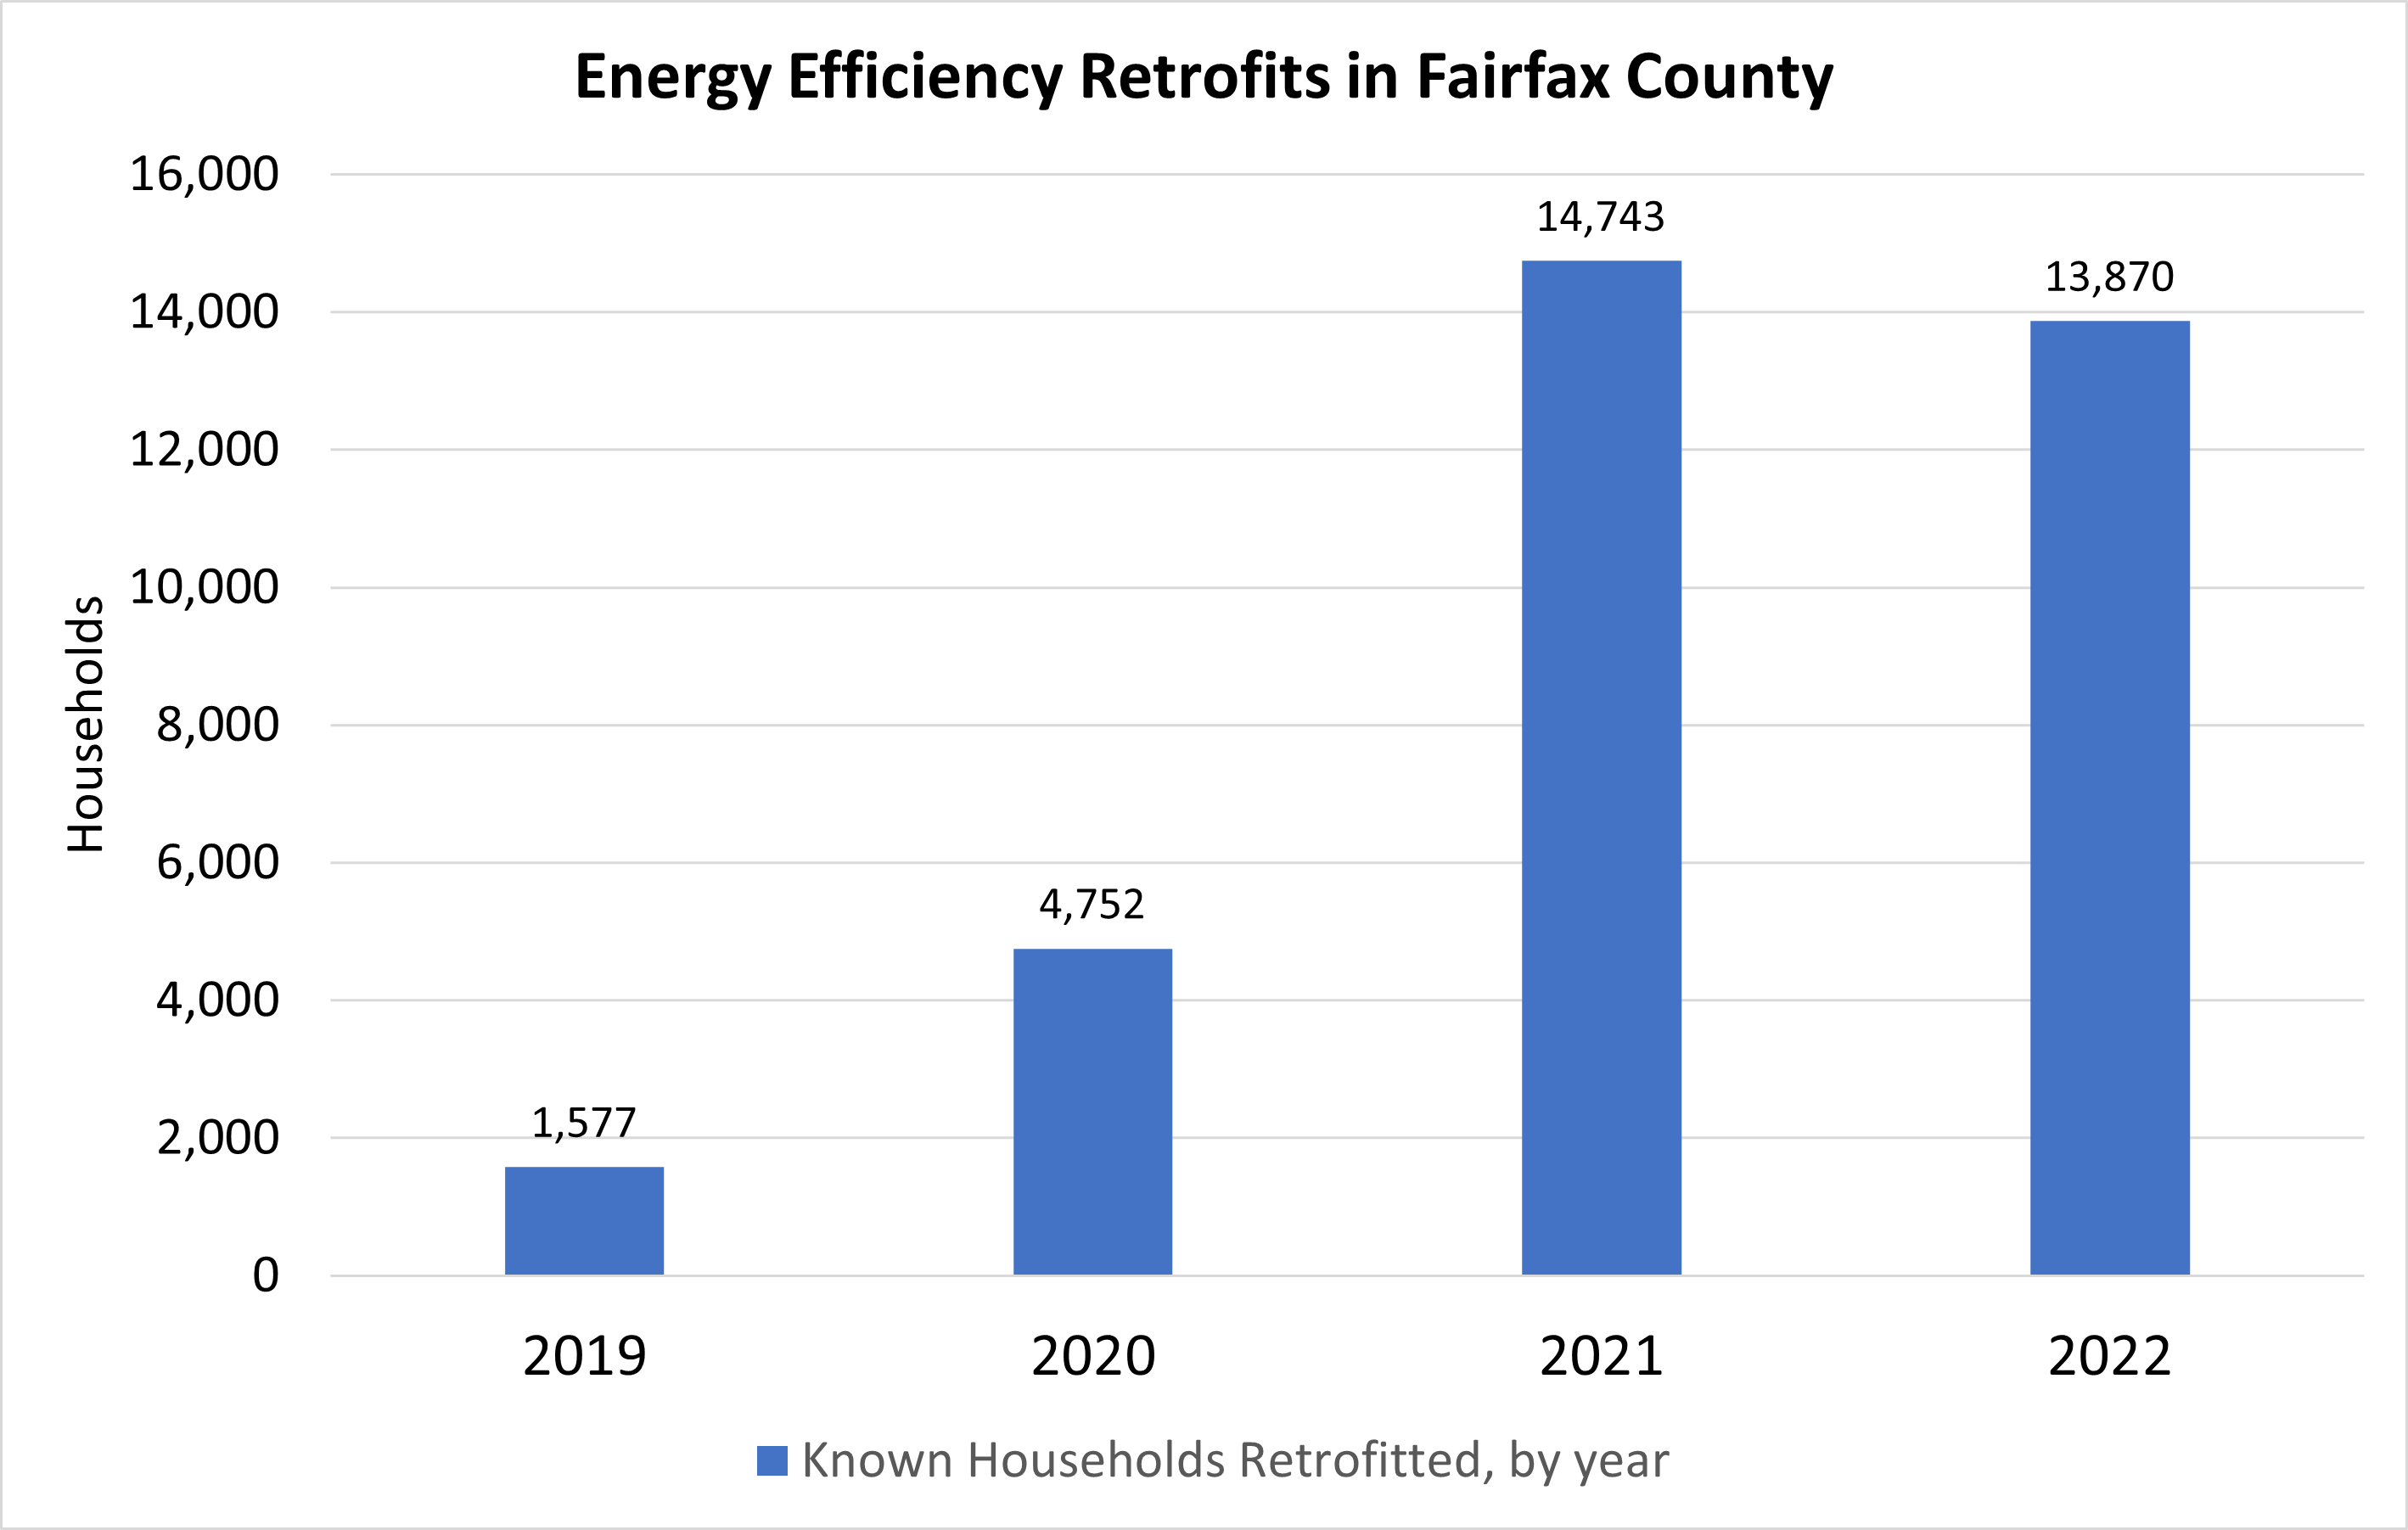 Energy Efficiency Retrofits in FFX County from 2019 to 2022